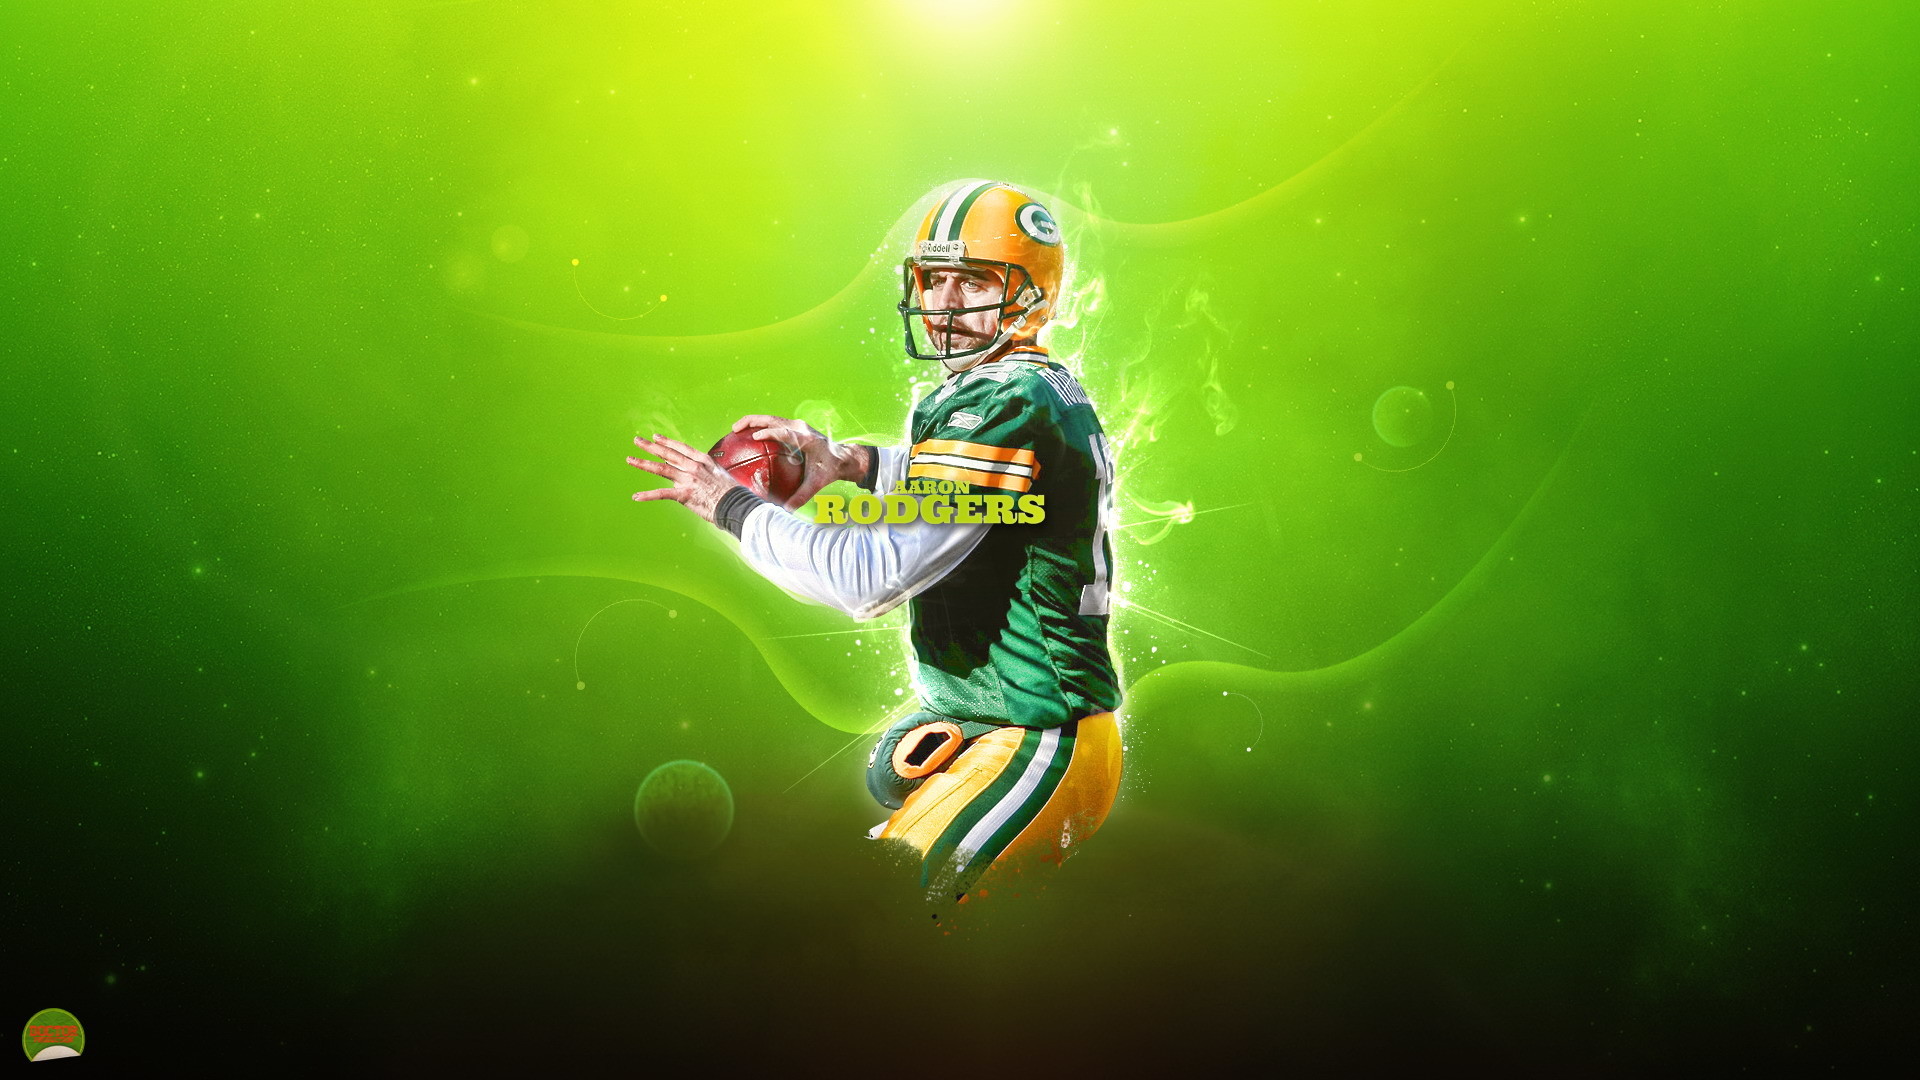 Wallpaper ID 1810317  Aaron Rodgers 1080P Football free download